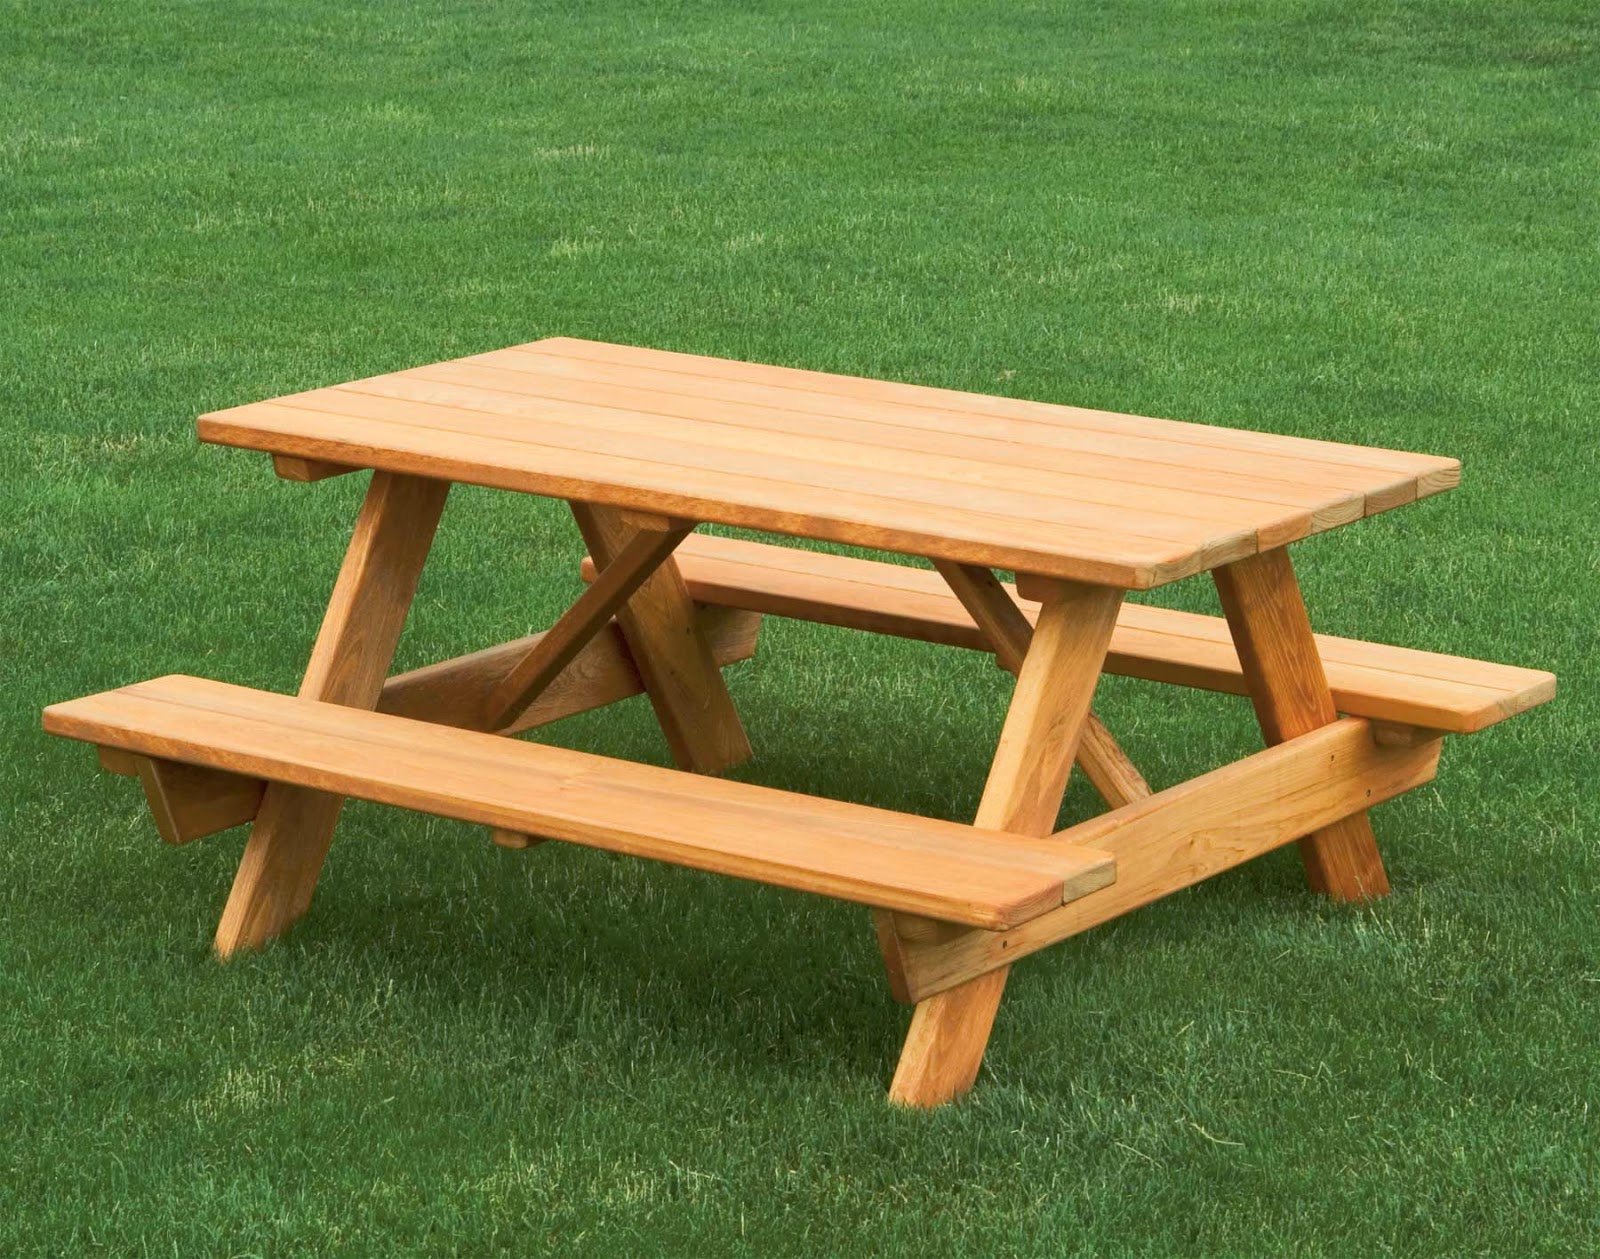 Woodworking Plans Reviewed: How to Build a Picnic Table - Step by Step